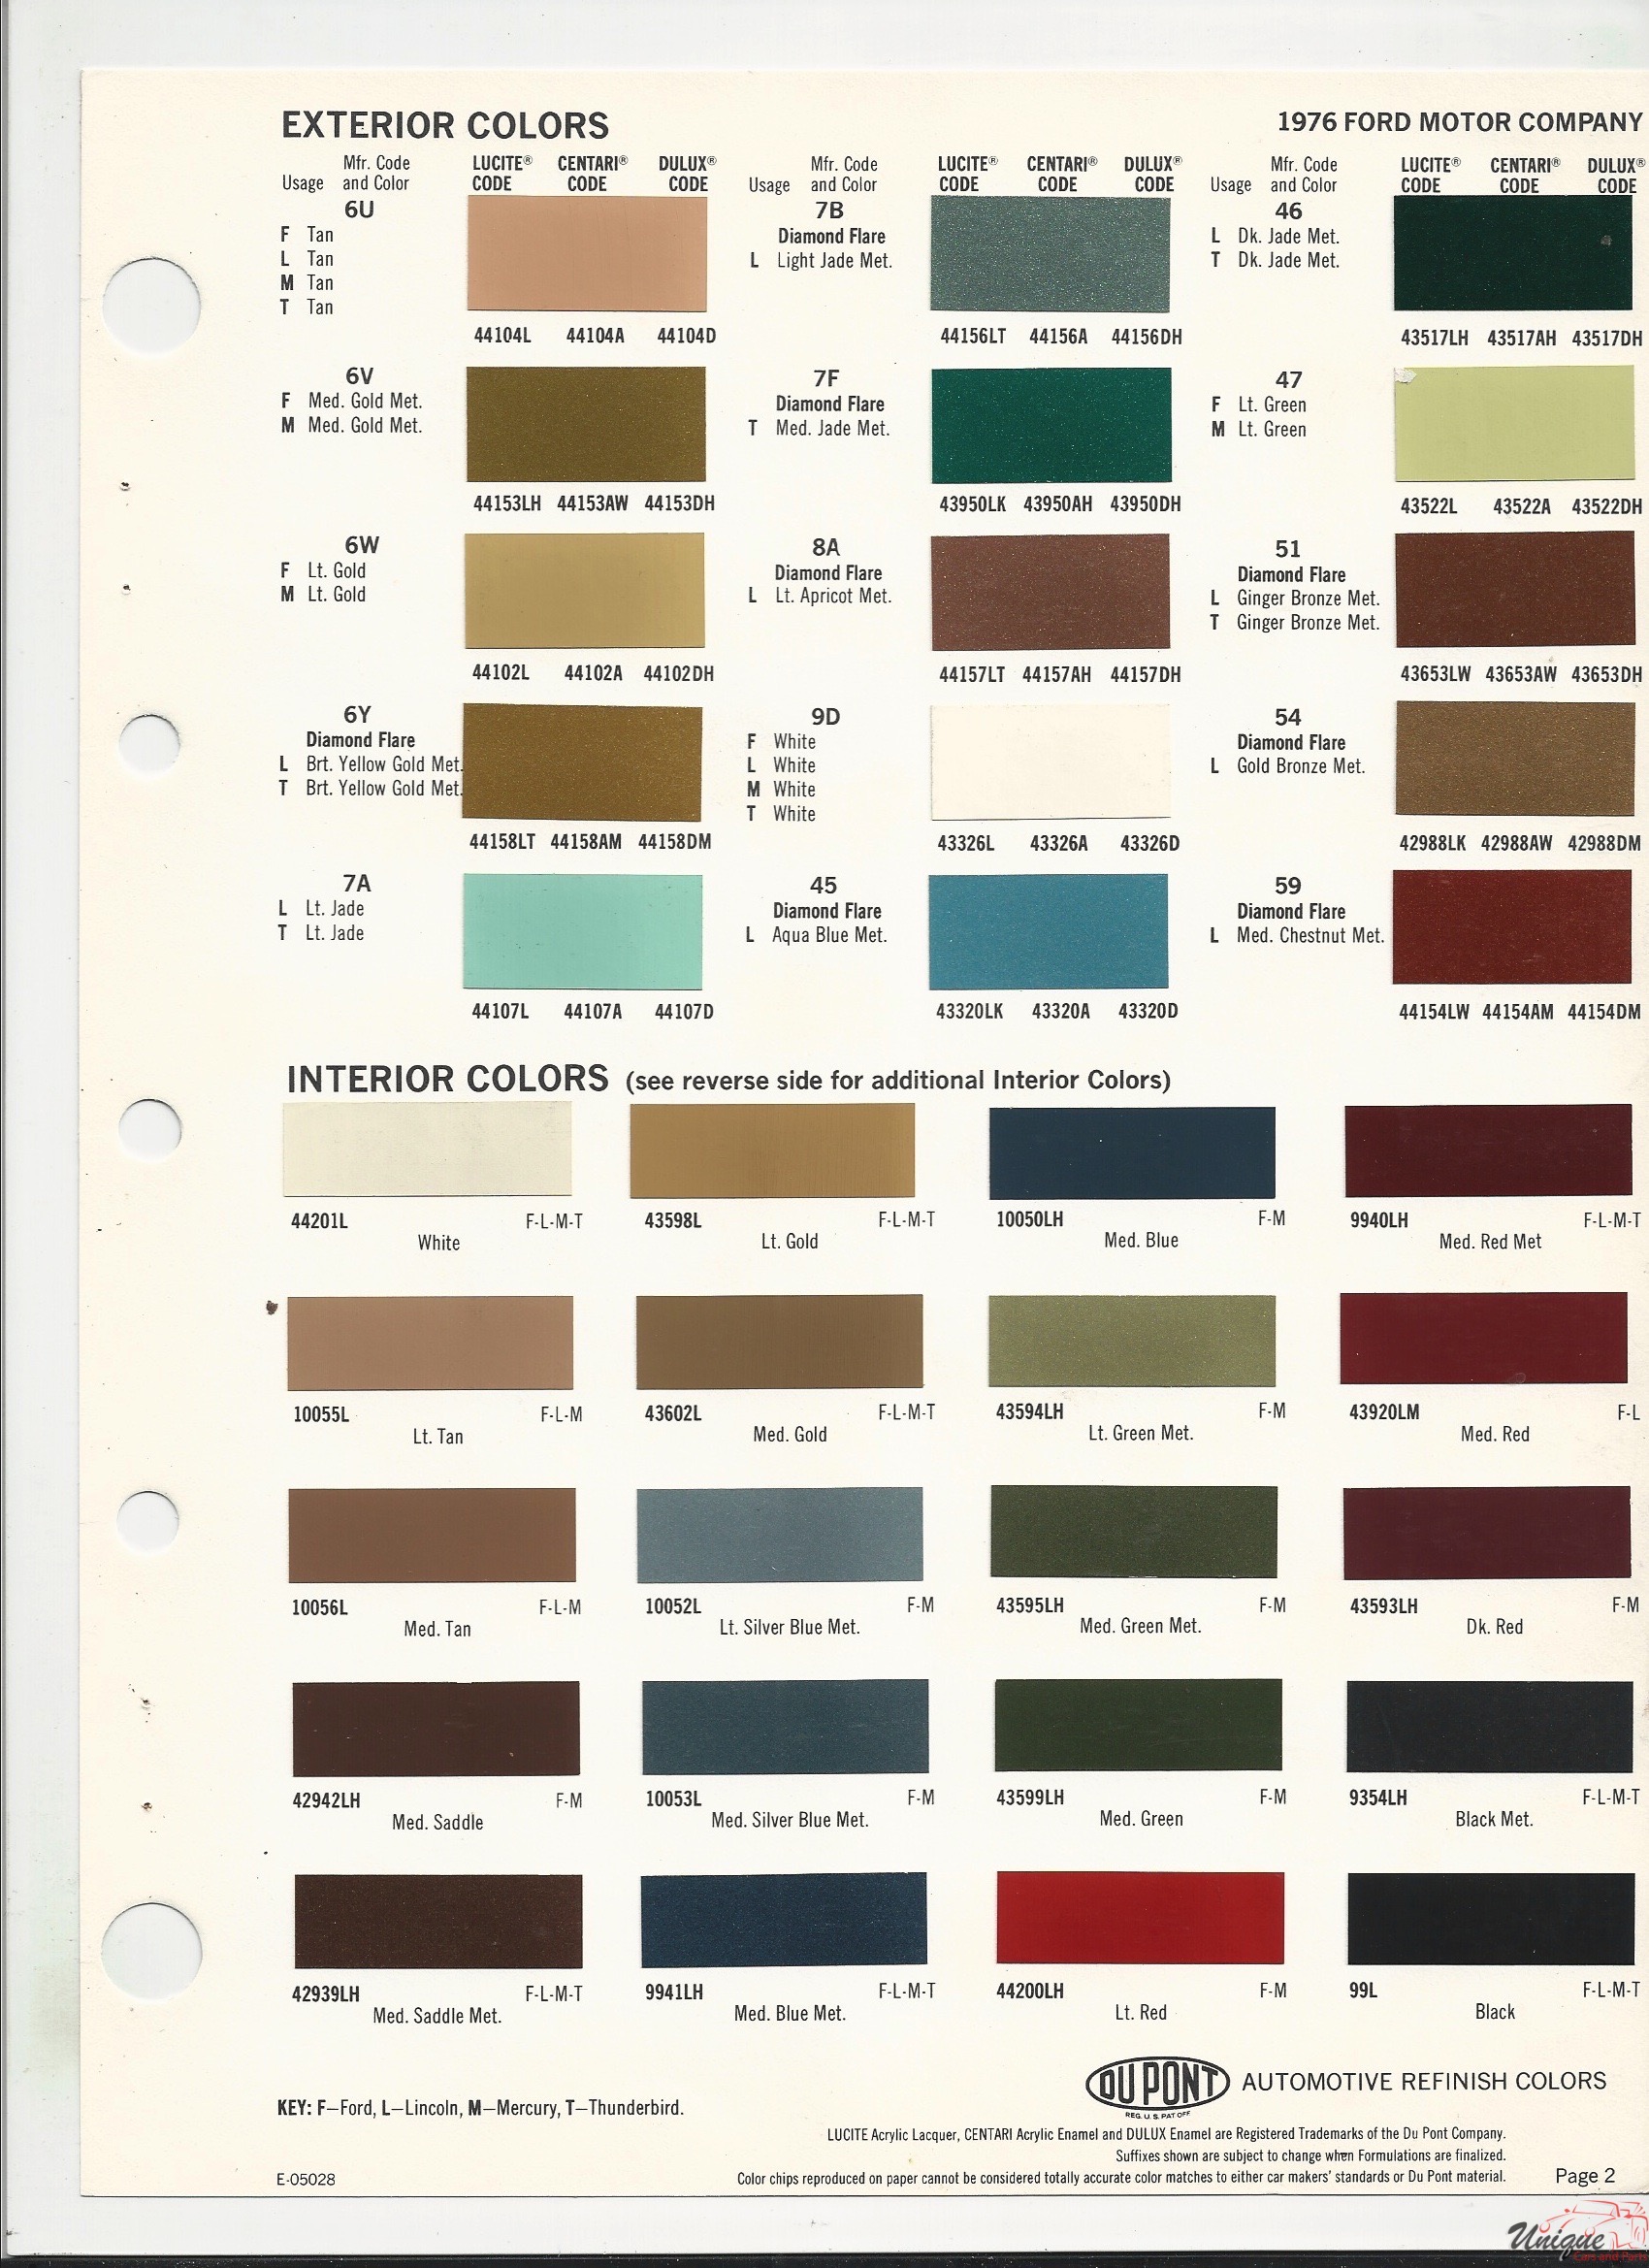 1976 Ford-1 Paint Charts